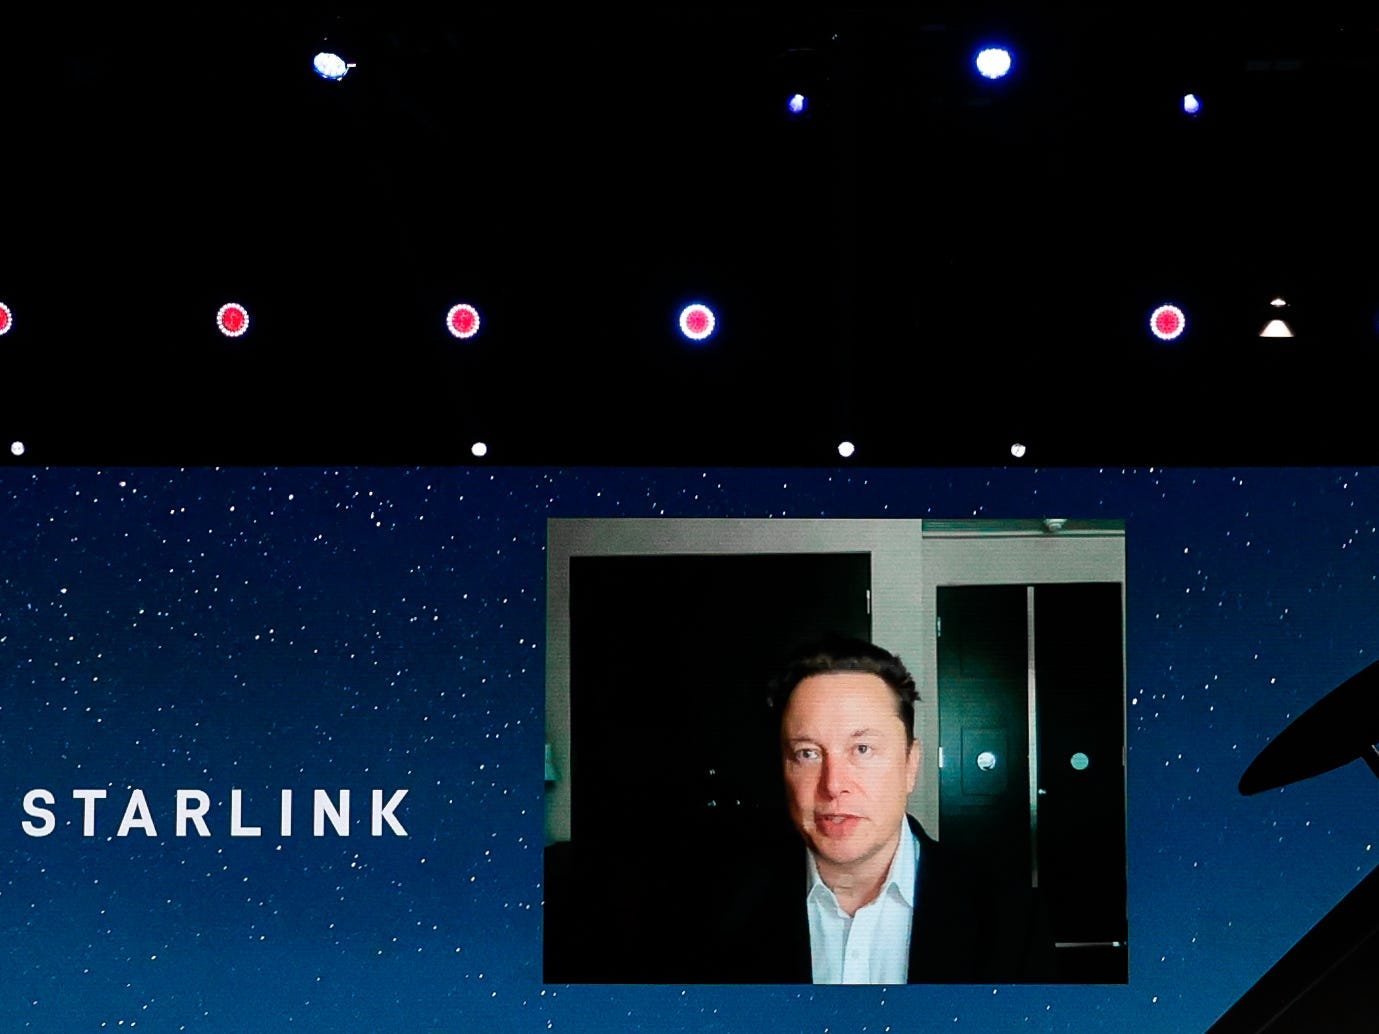 SpaceX founder Elon Musk on a video stage speaking about Starlink